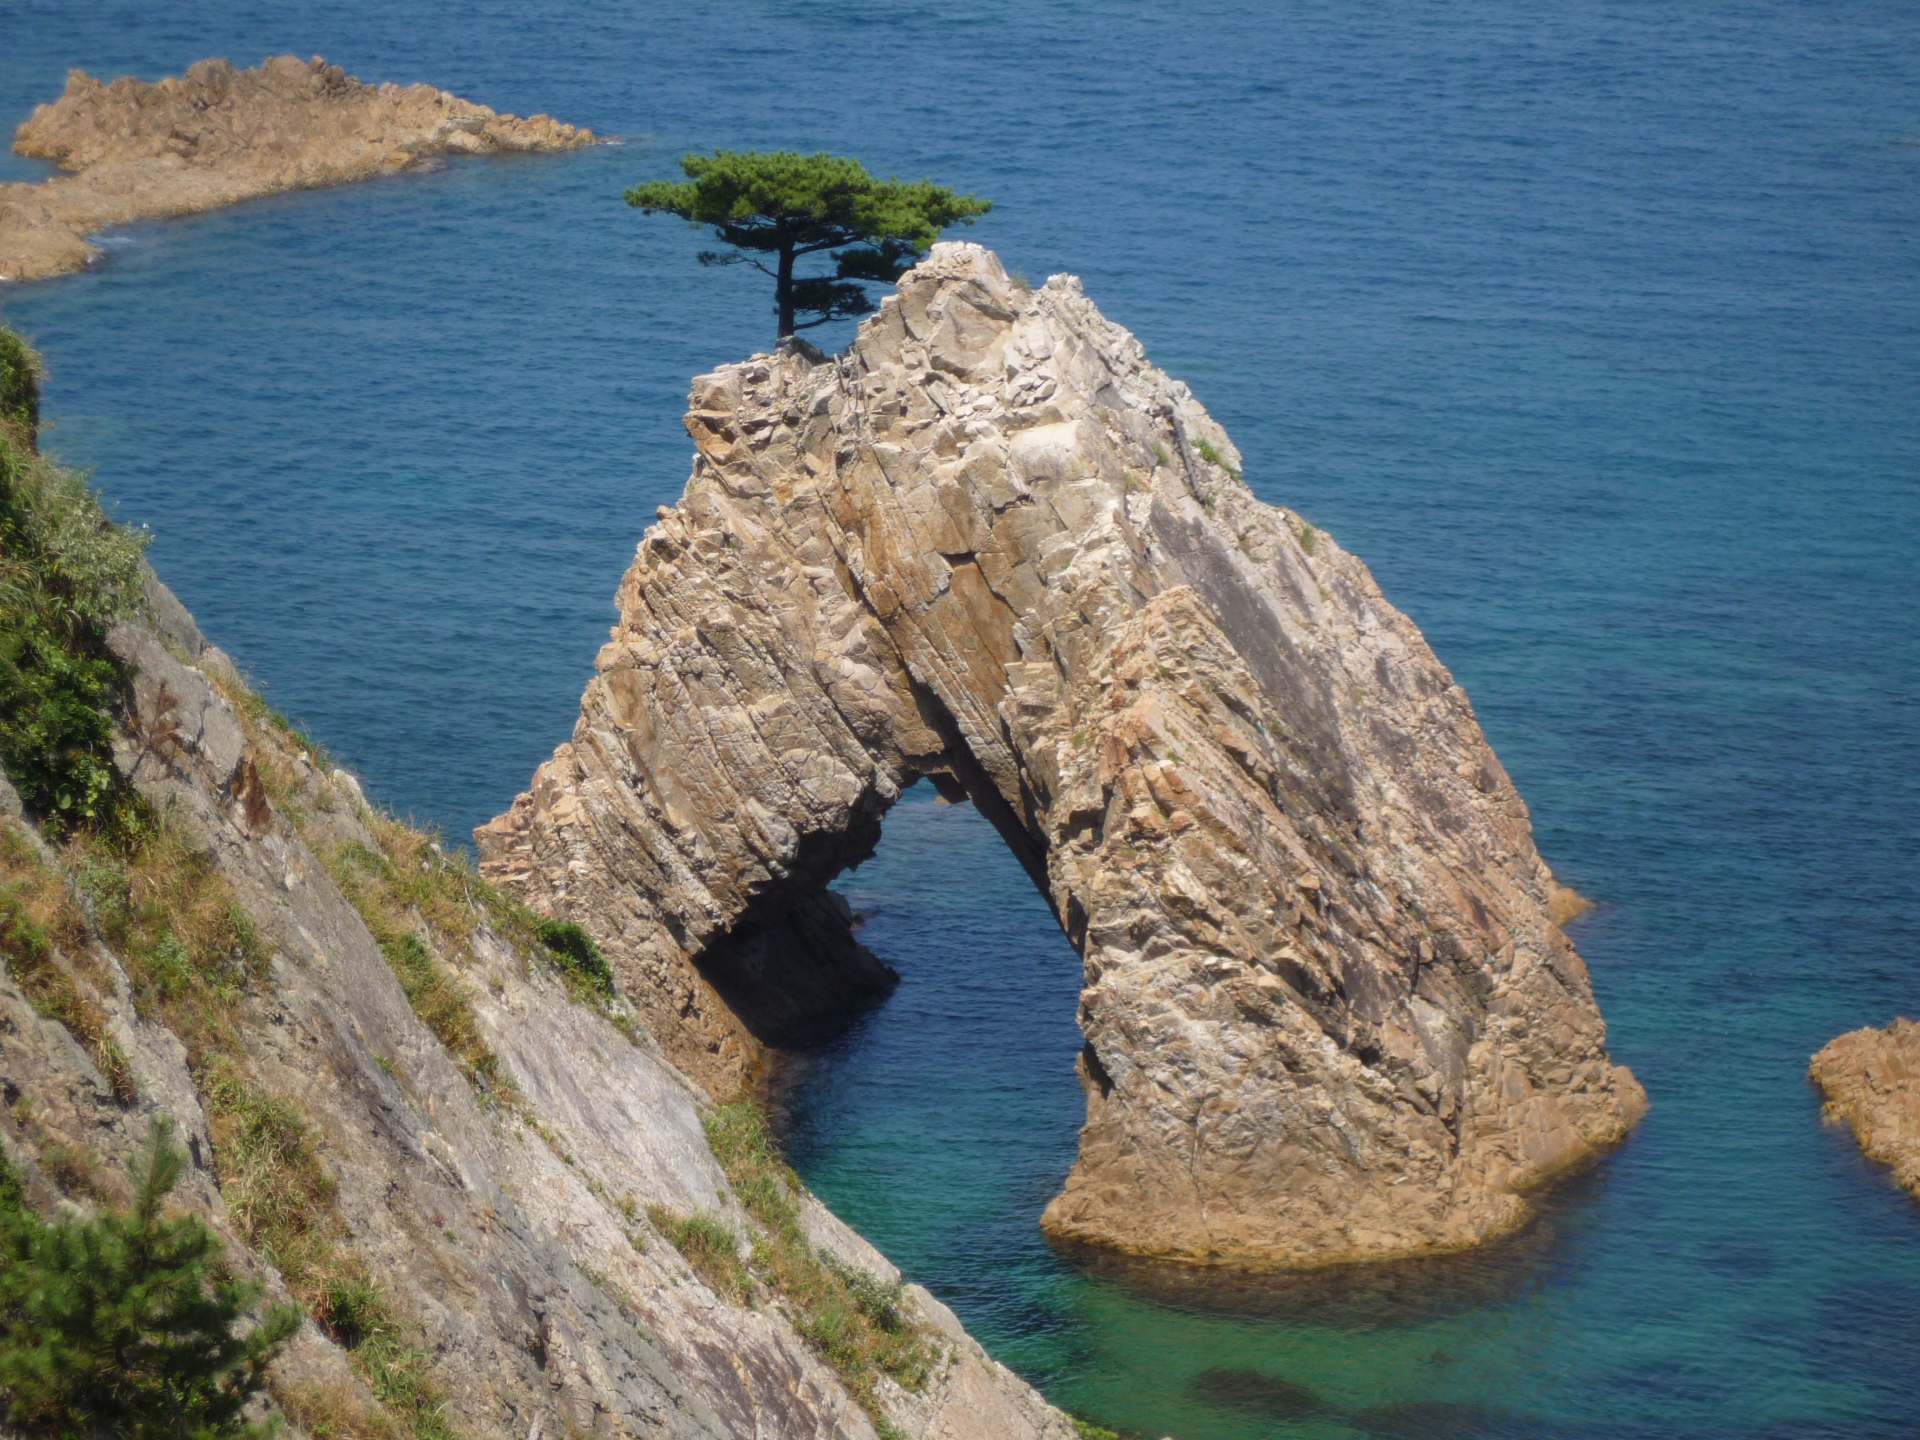 50m (164 ft) in circumference and 10m (33 ft)-tall cave is topped with a pretty pine tree. Sengan Matsushima is one of the incredible rocks of the Uradome Coast.